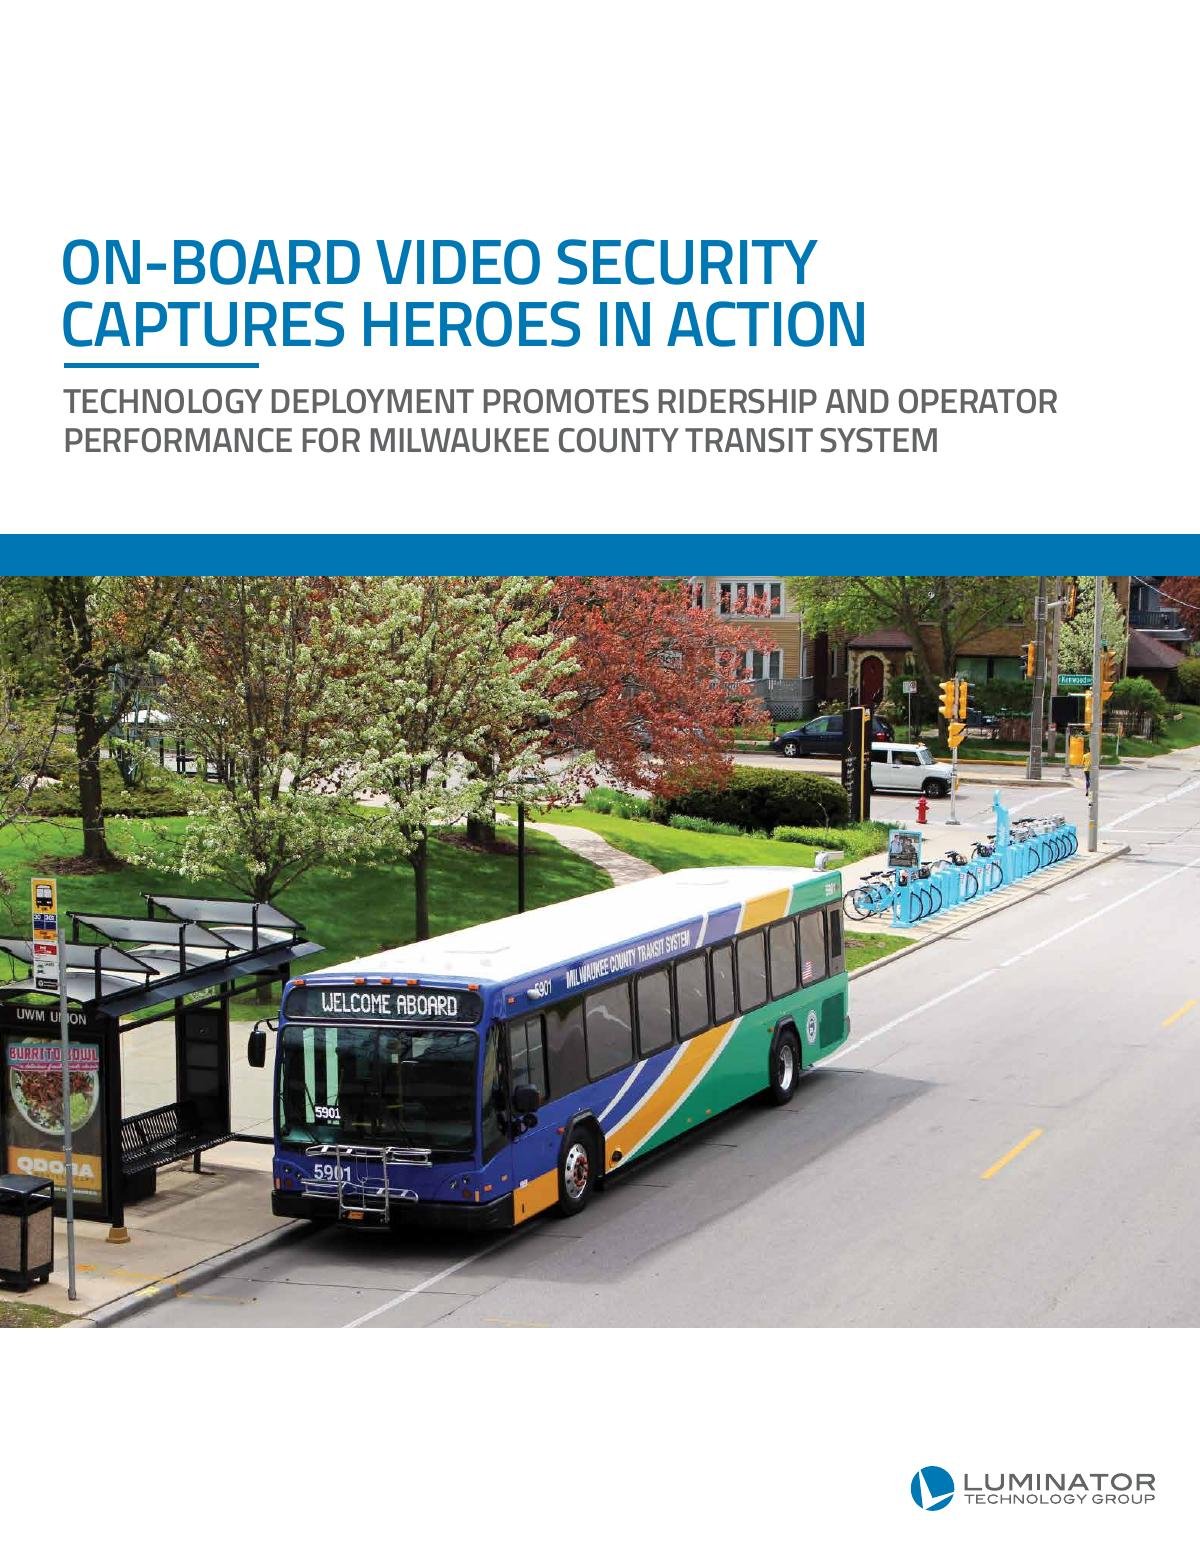 On-Board Video Security Captures Heroes in Action